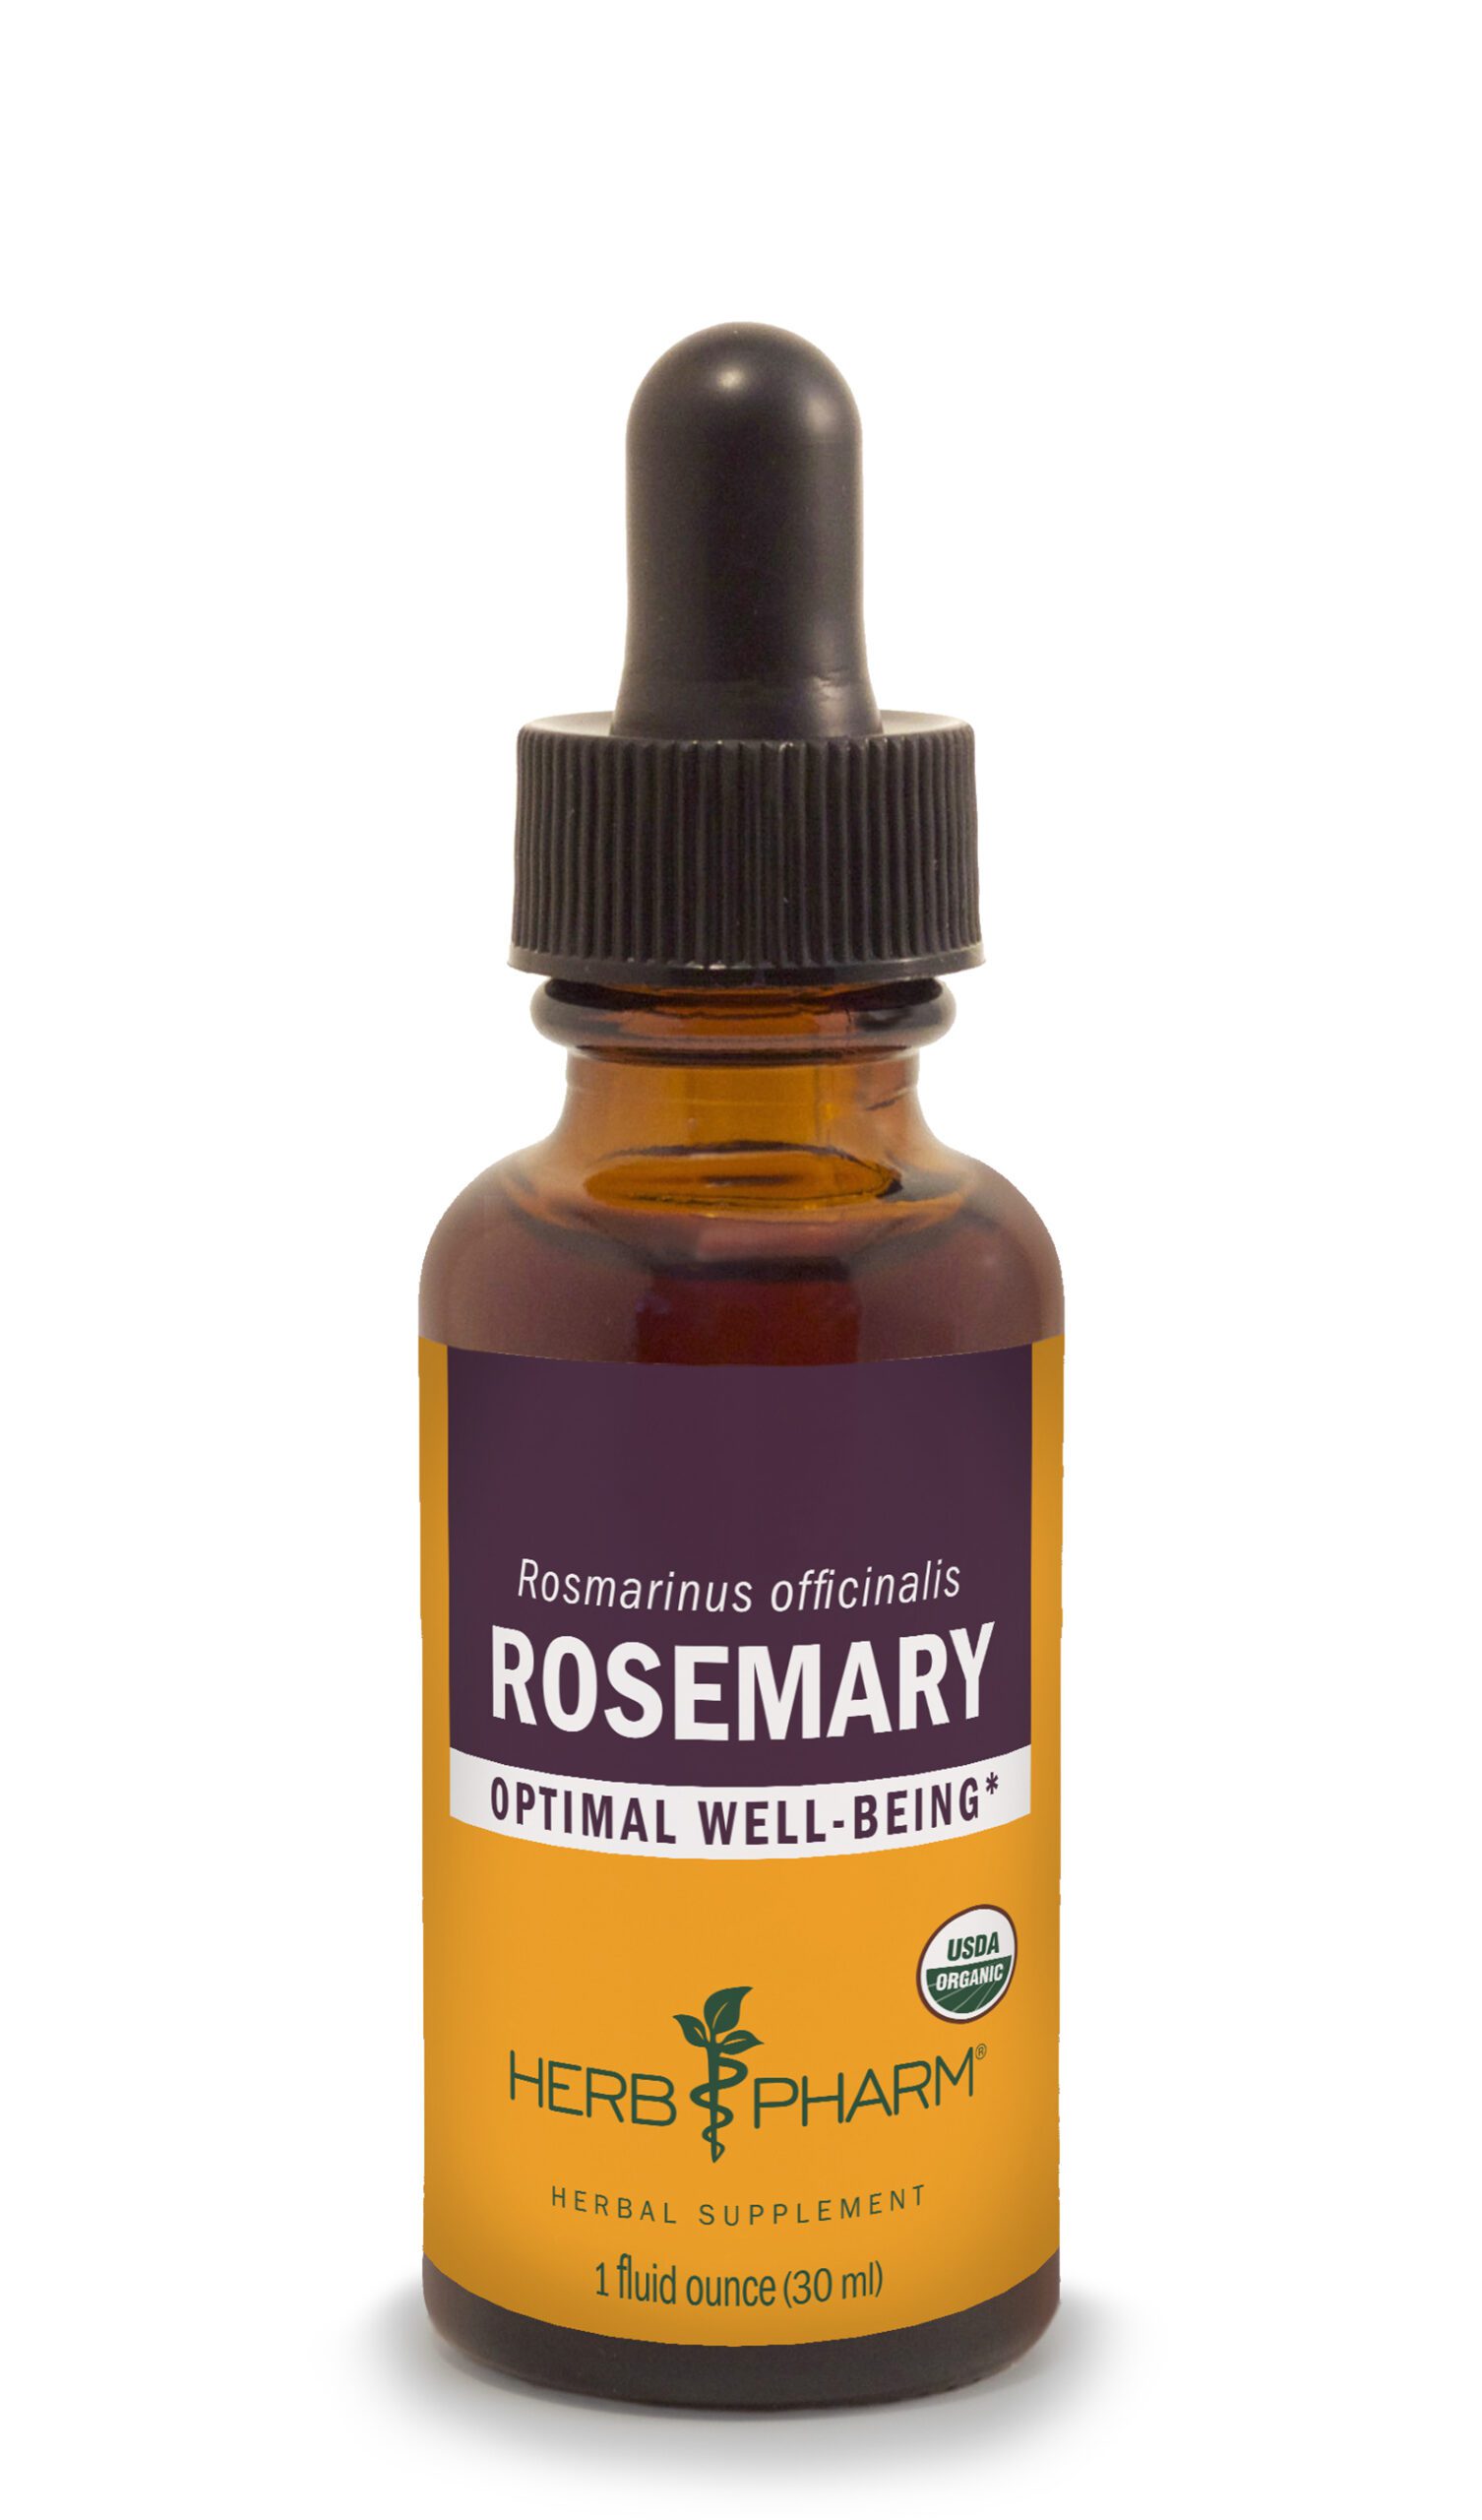 Product Listing Image for Herb Pharm Rosemary Tincture 1oz